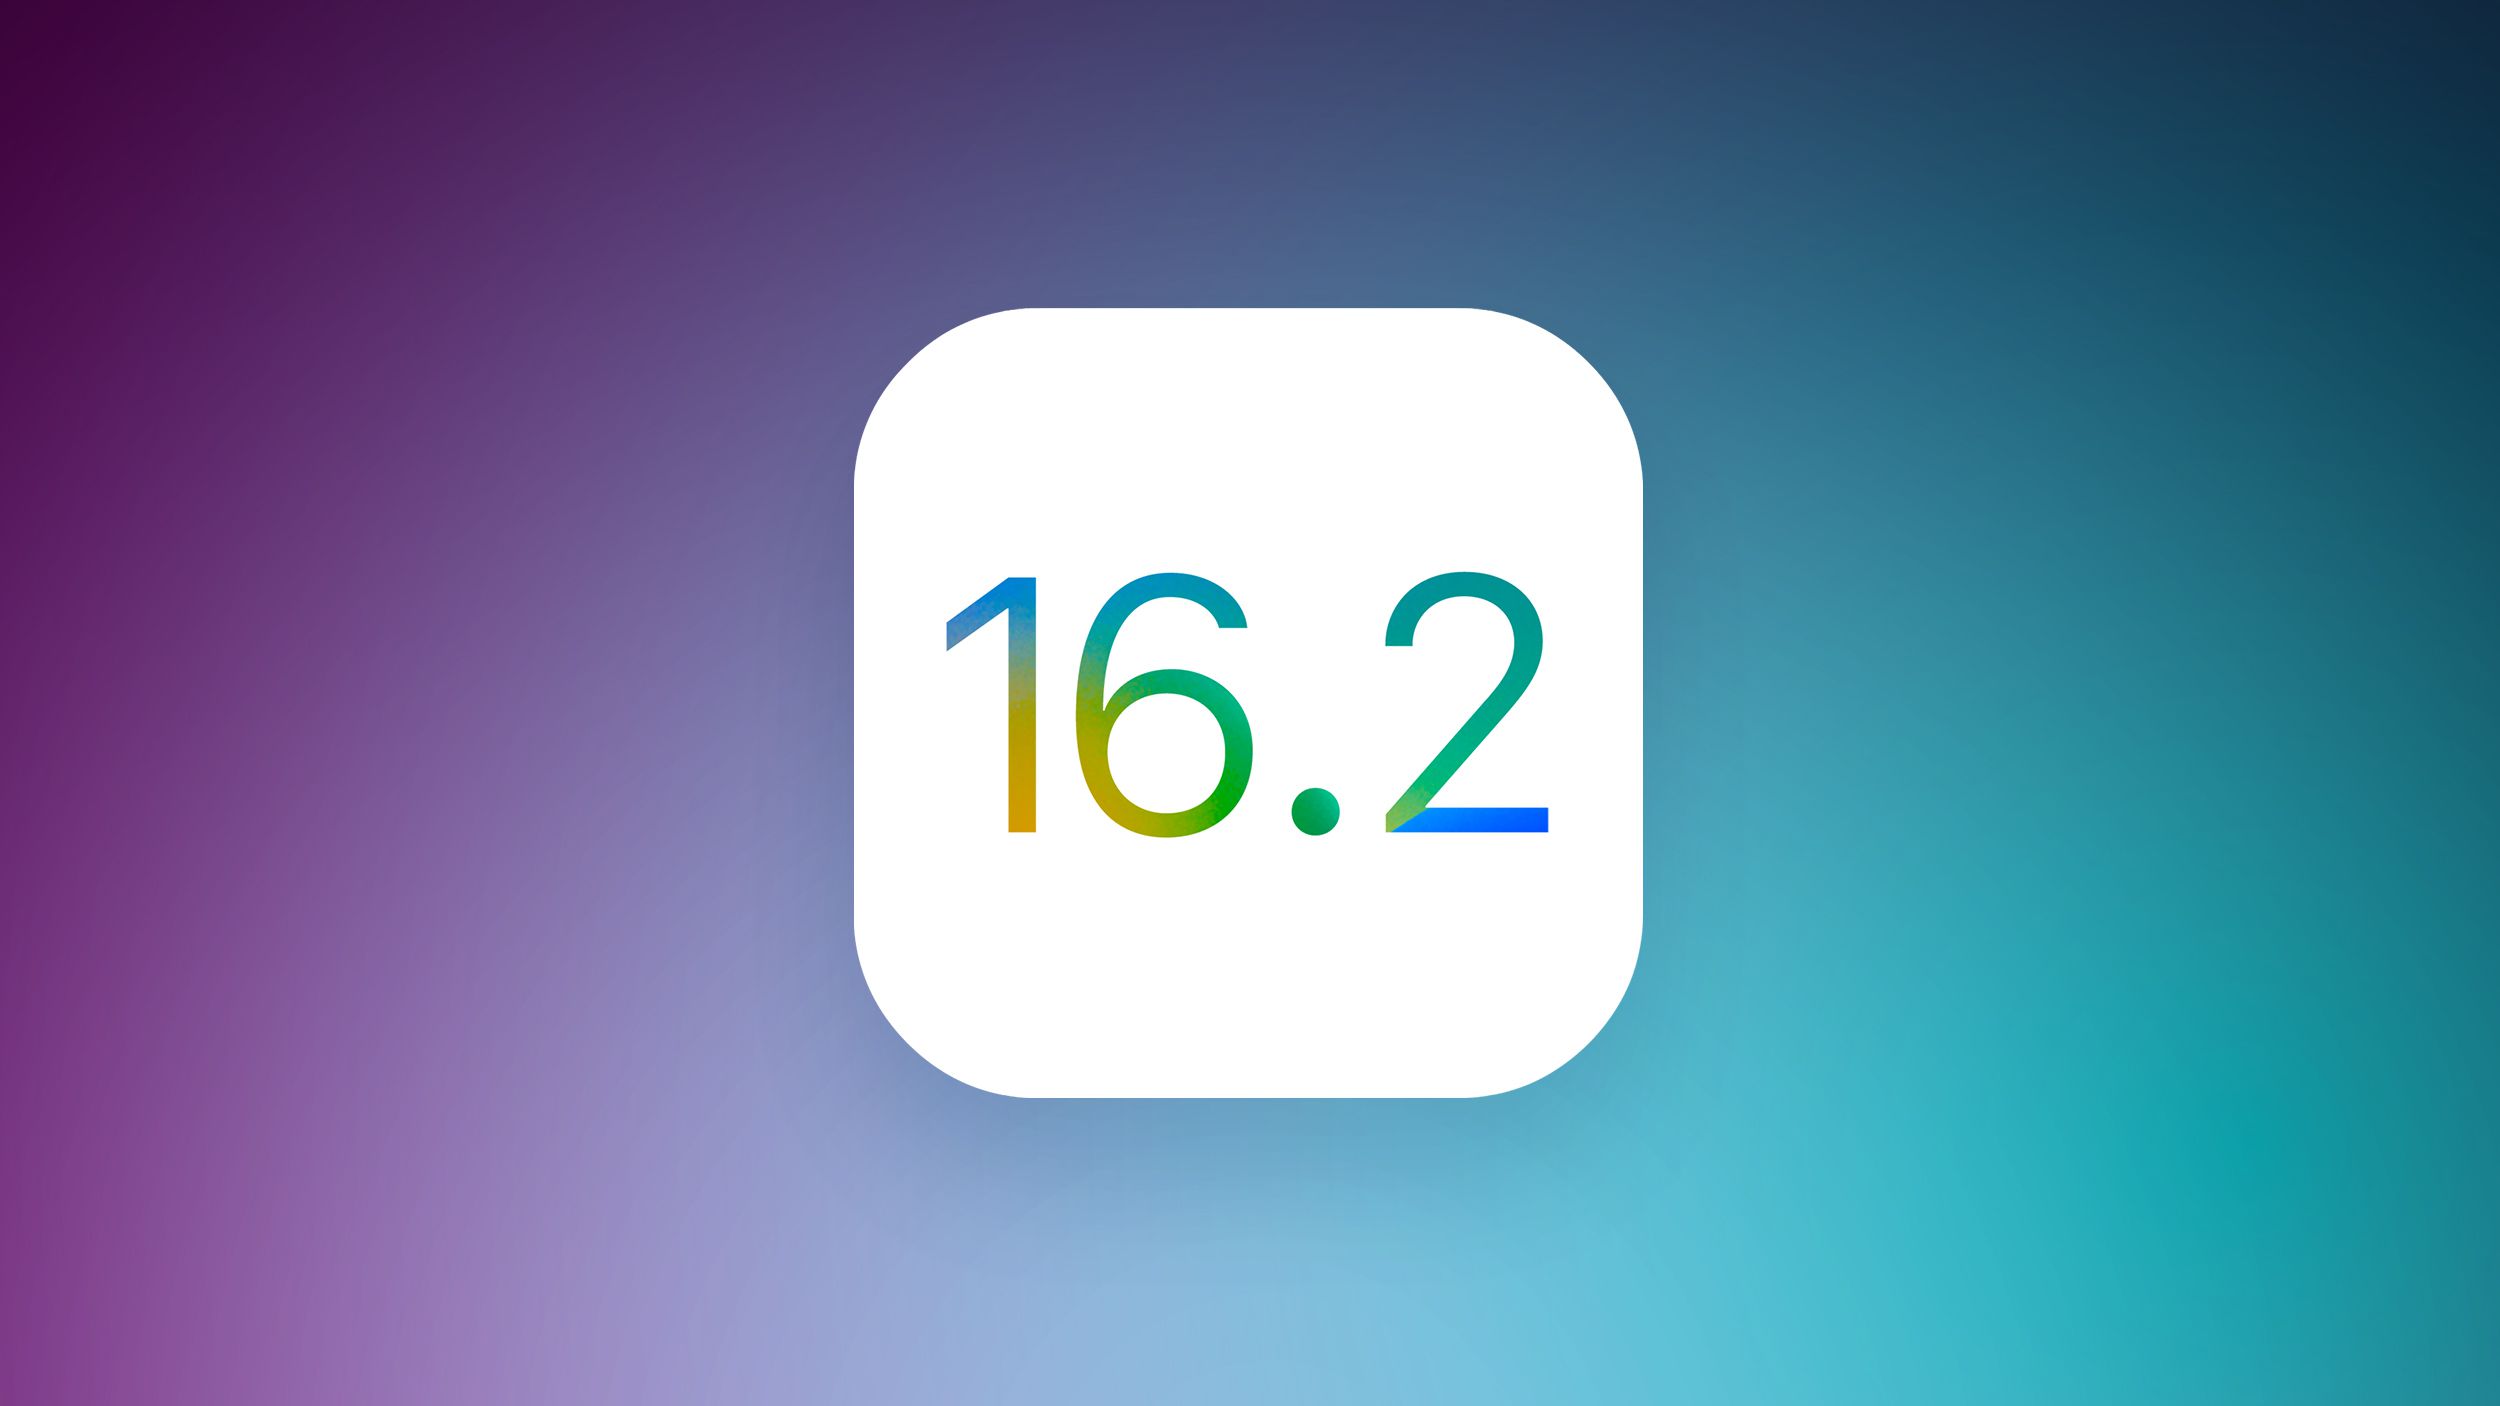 Apple Releases iOS 16.2 and iPadOS 16.2 With Freeform Apple Music Sing Advanced Data Protection and More – MacRumors